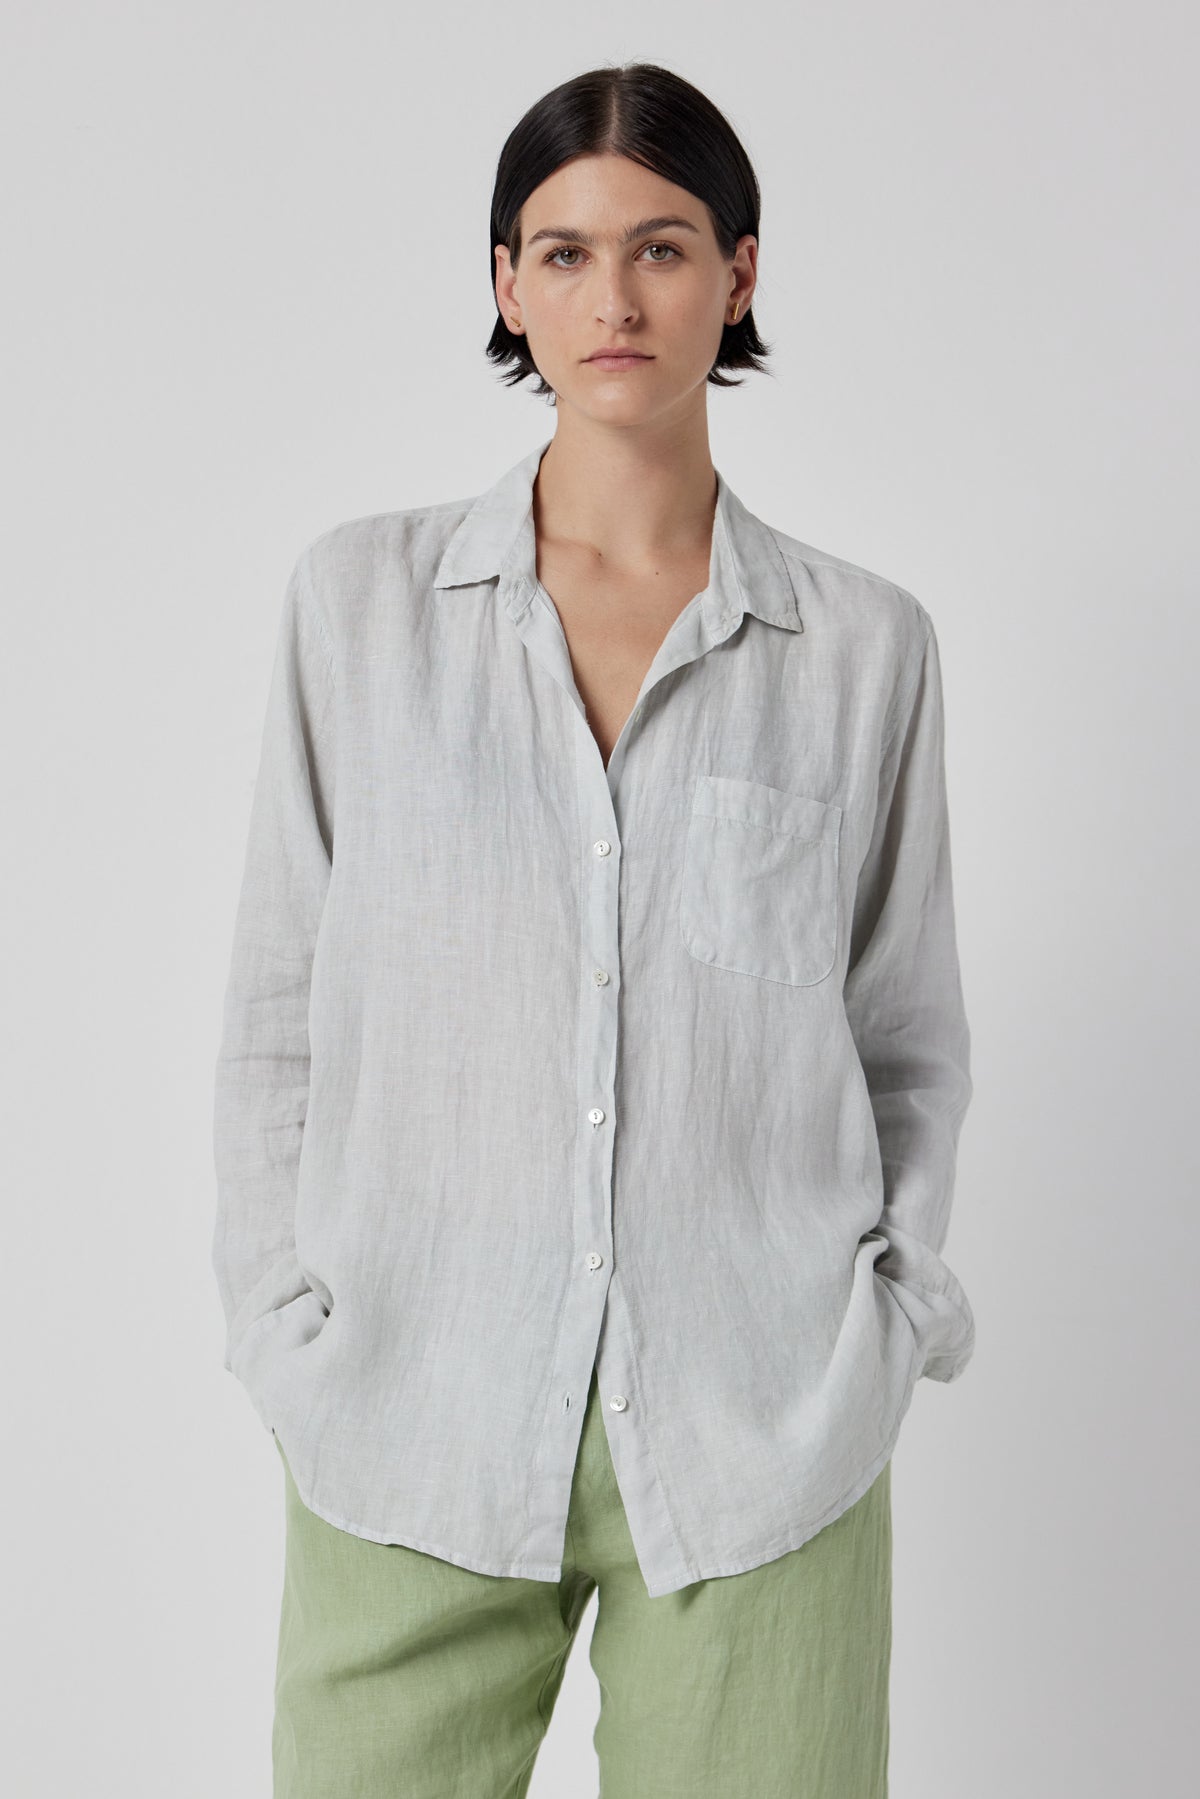   A person with short dark hair wearing a Velvet by Jenny Graham MULHOLLAND LINEN SHIRT in light gray with a scooped hemline and light green pants stands against a plain white background. 